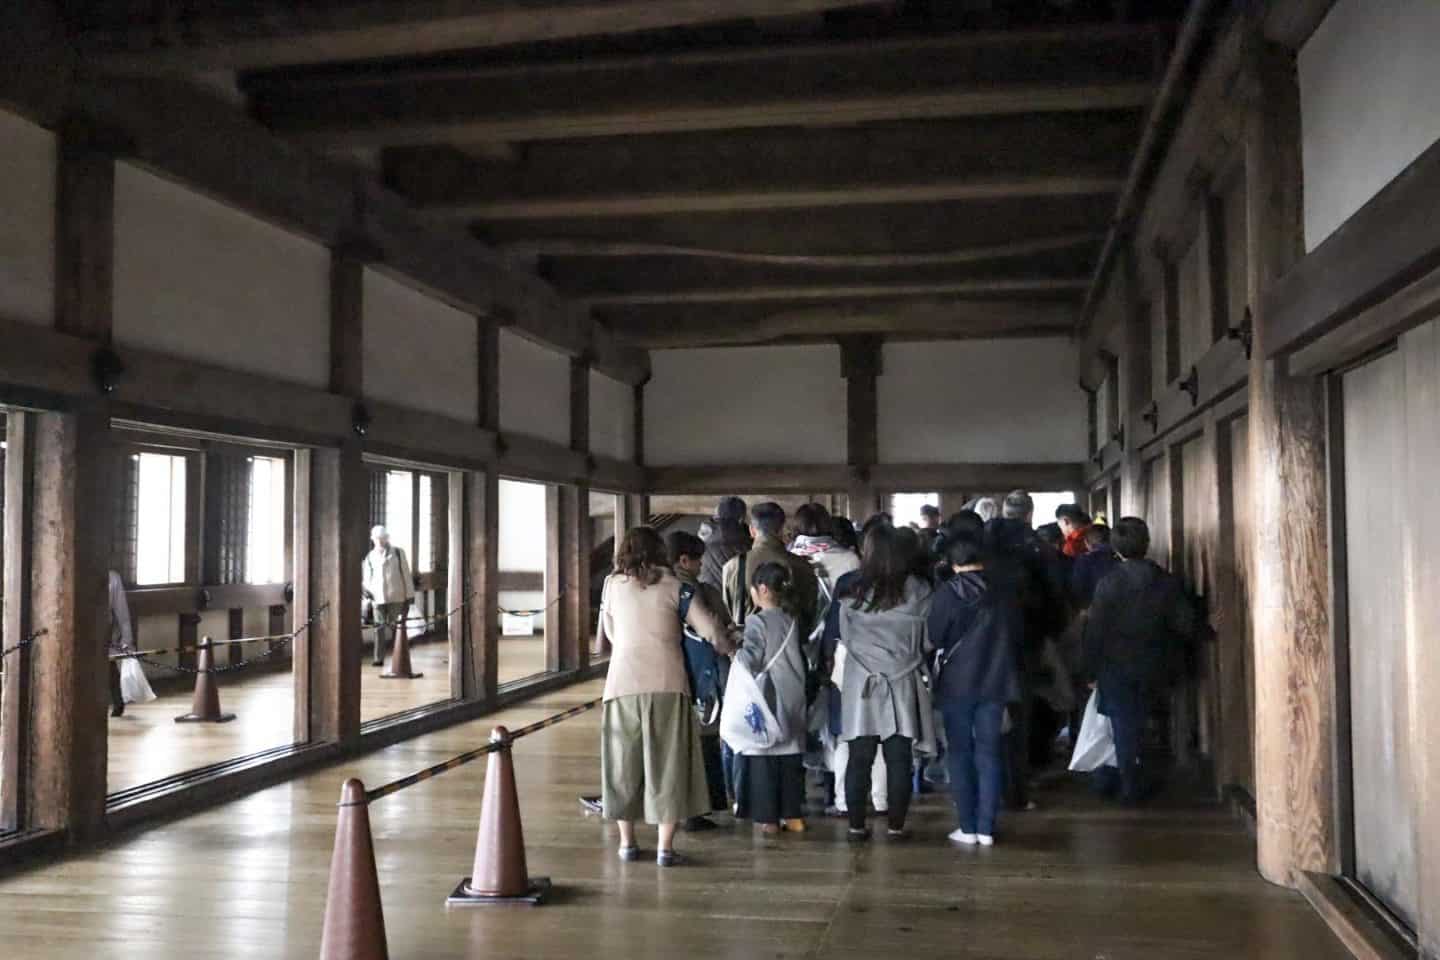 Himeji day trip, Visiting Himeji Castle on a Day Trip or on the Way to Hiroshima